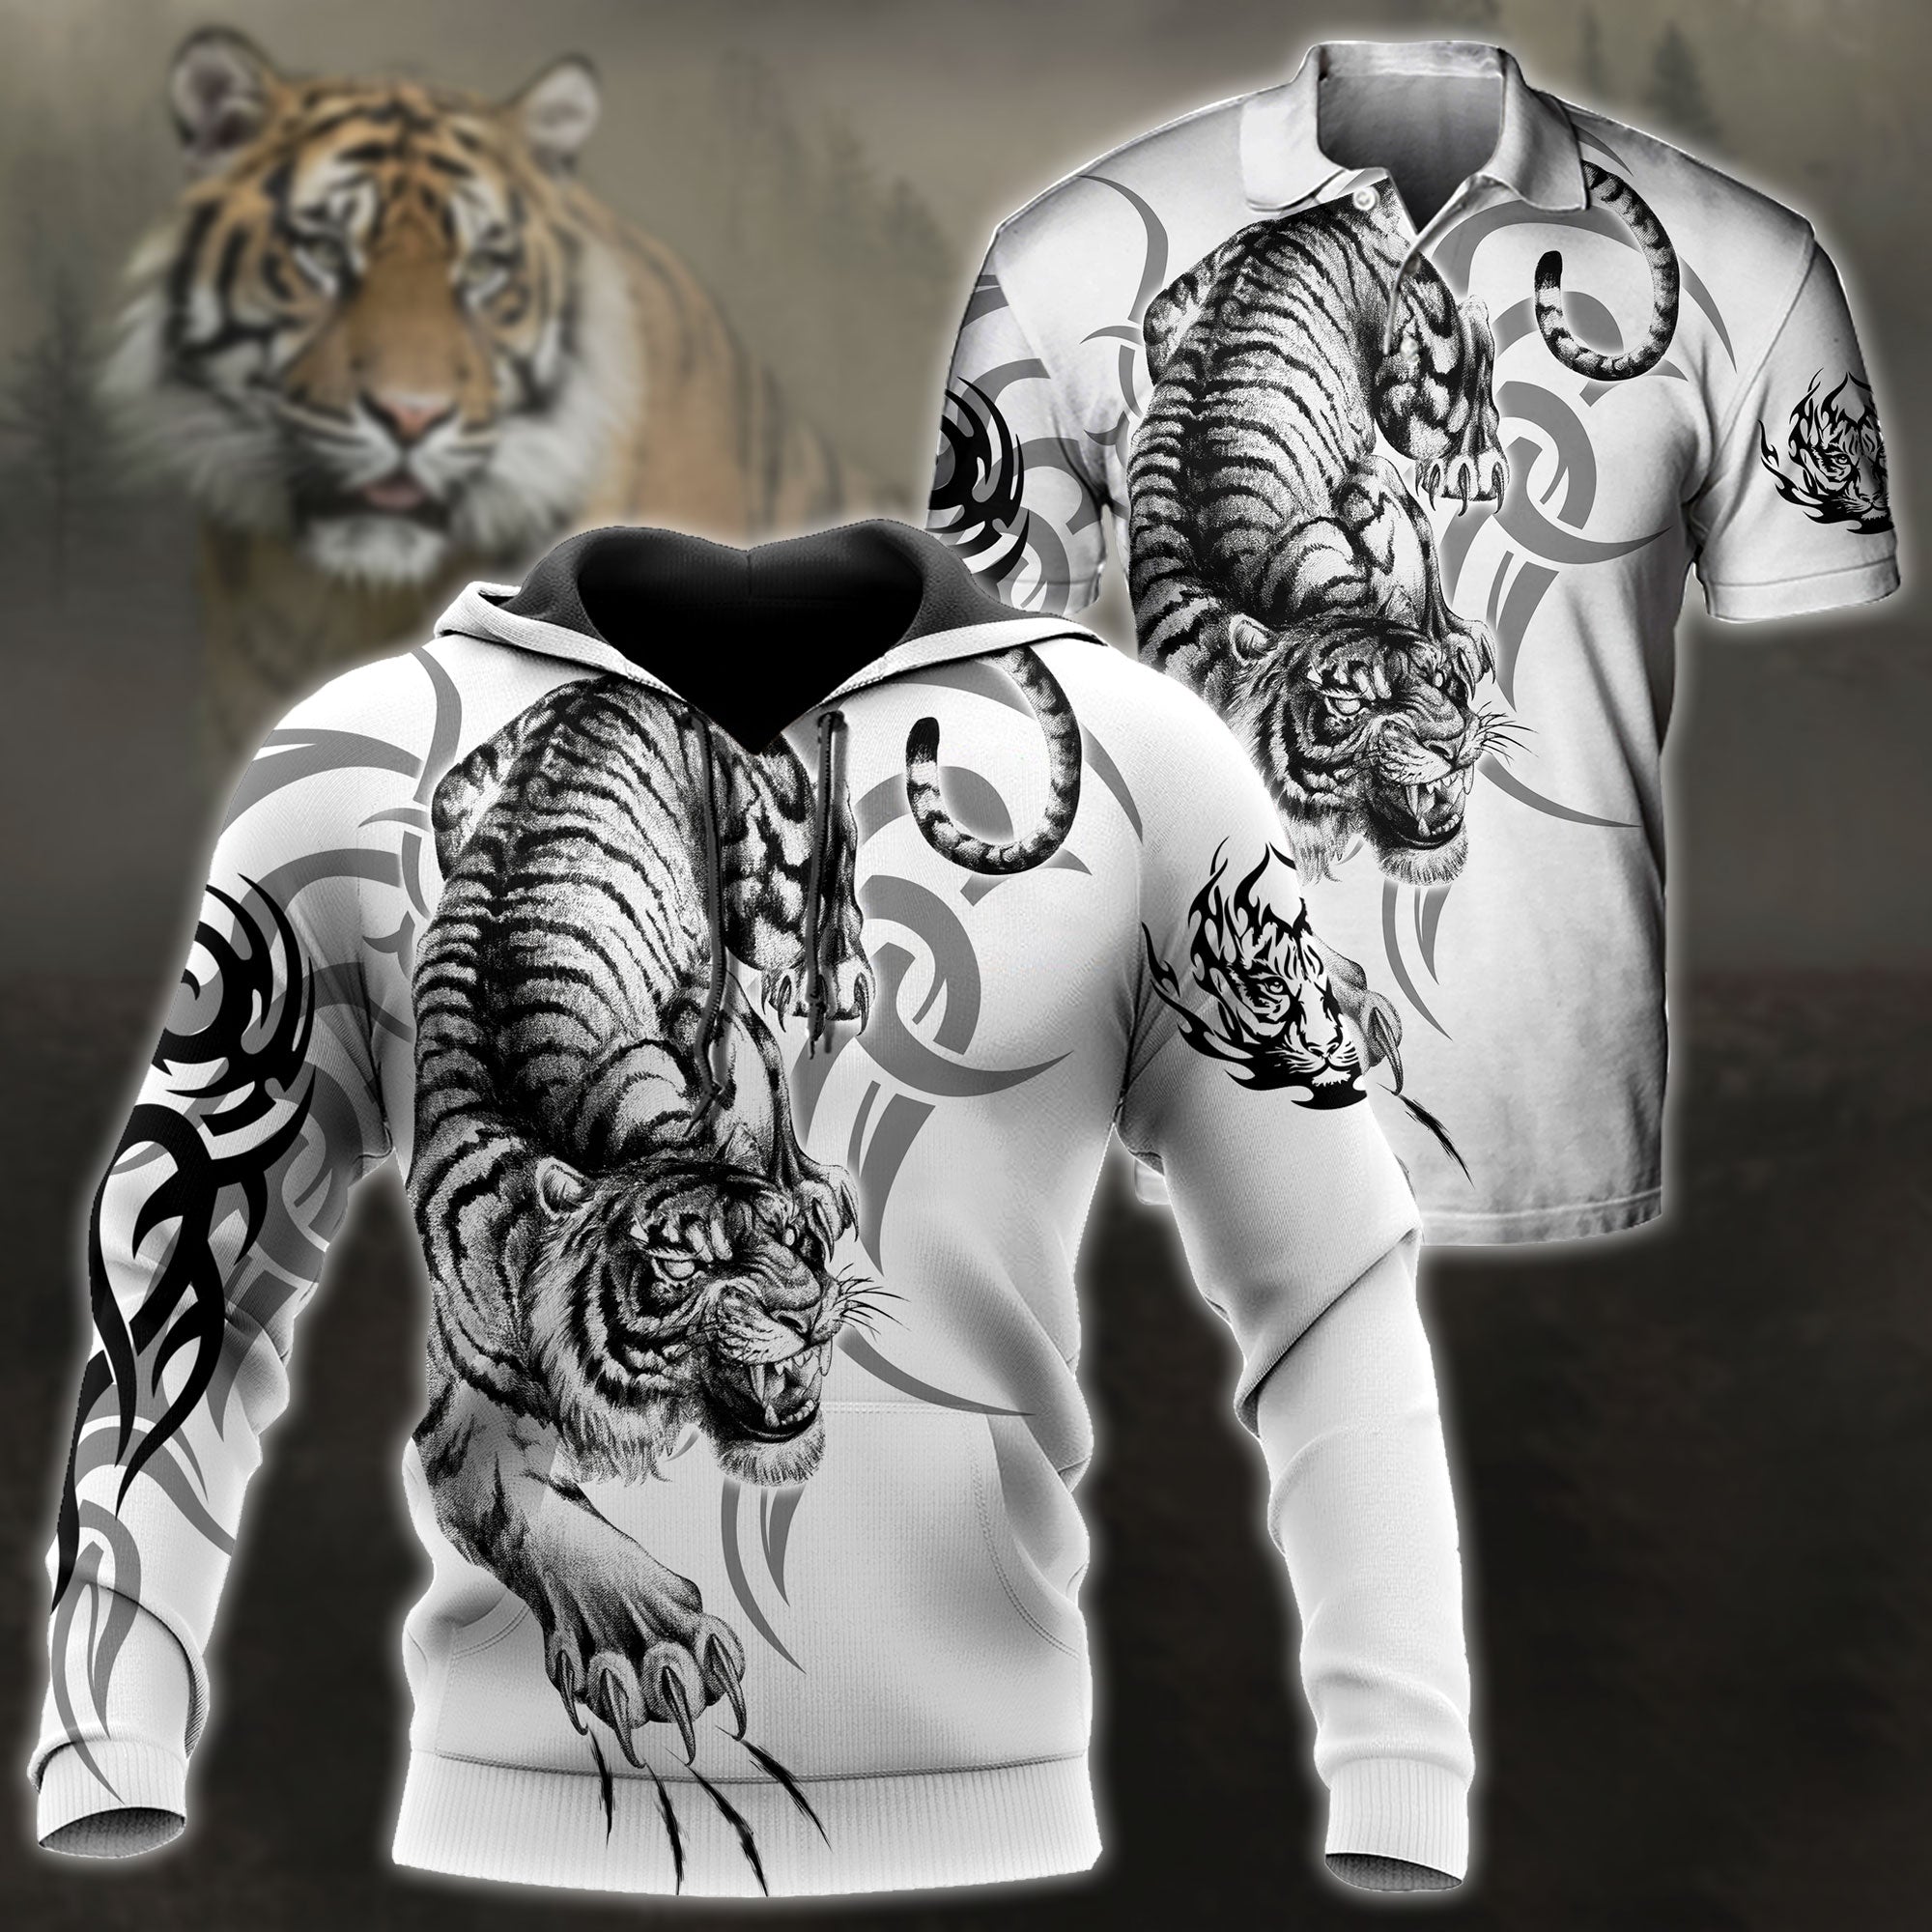 The Toy Tiger Louisville Classic T-Shirt aesthetic clothes men workout shirt  mens white t shirts anime - AliExpress